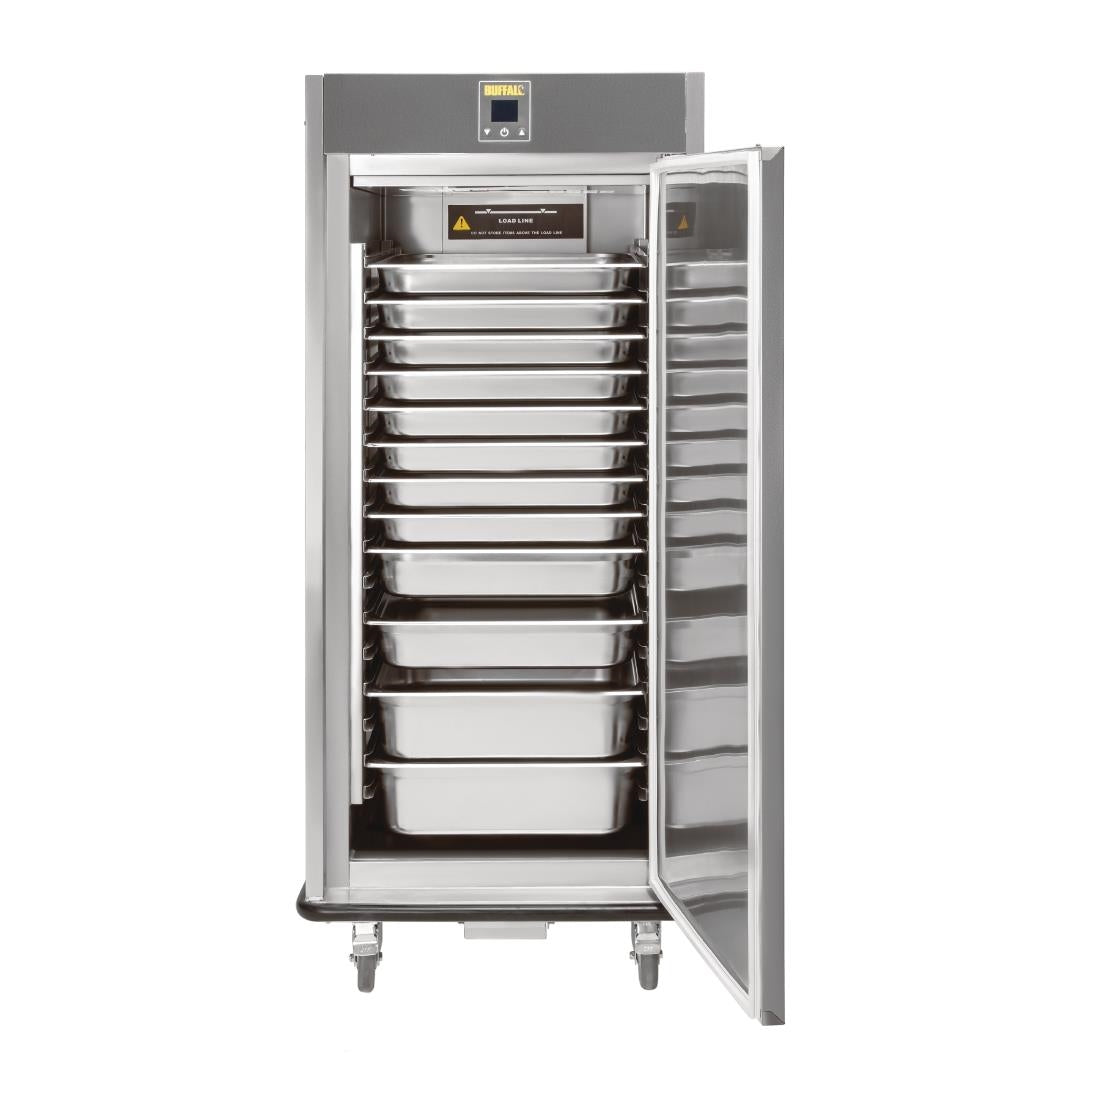 CP829 Buffalo Heated Banquet Cabinet 16 x 2/1GN JD Catering Equipment Solutions Ltd